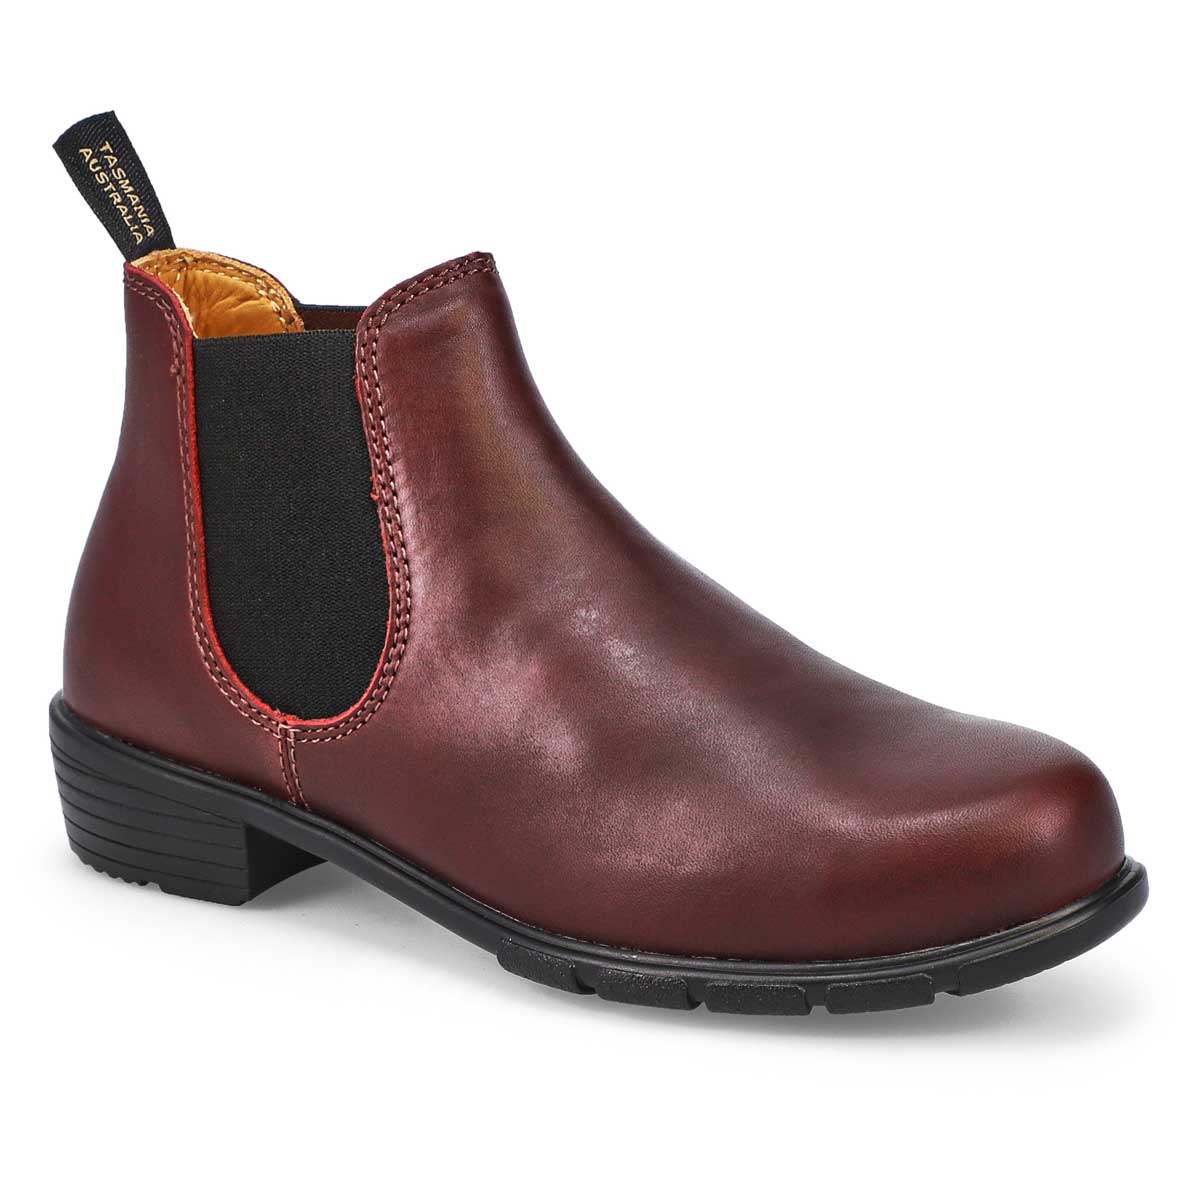 Blundstone Women's 2176 The Ankle Boot - Shir | SoftMoc.com